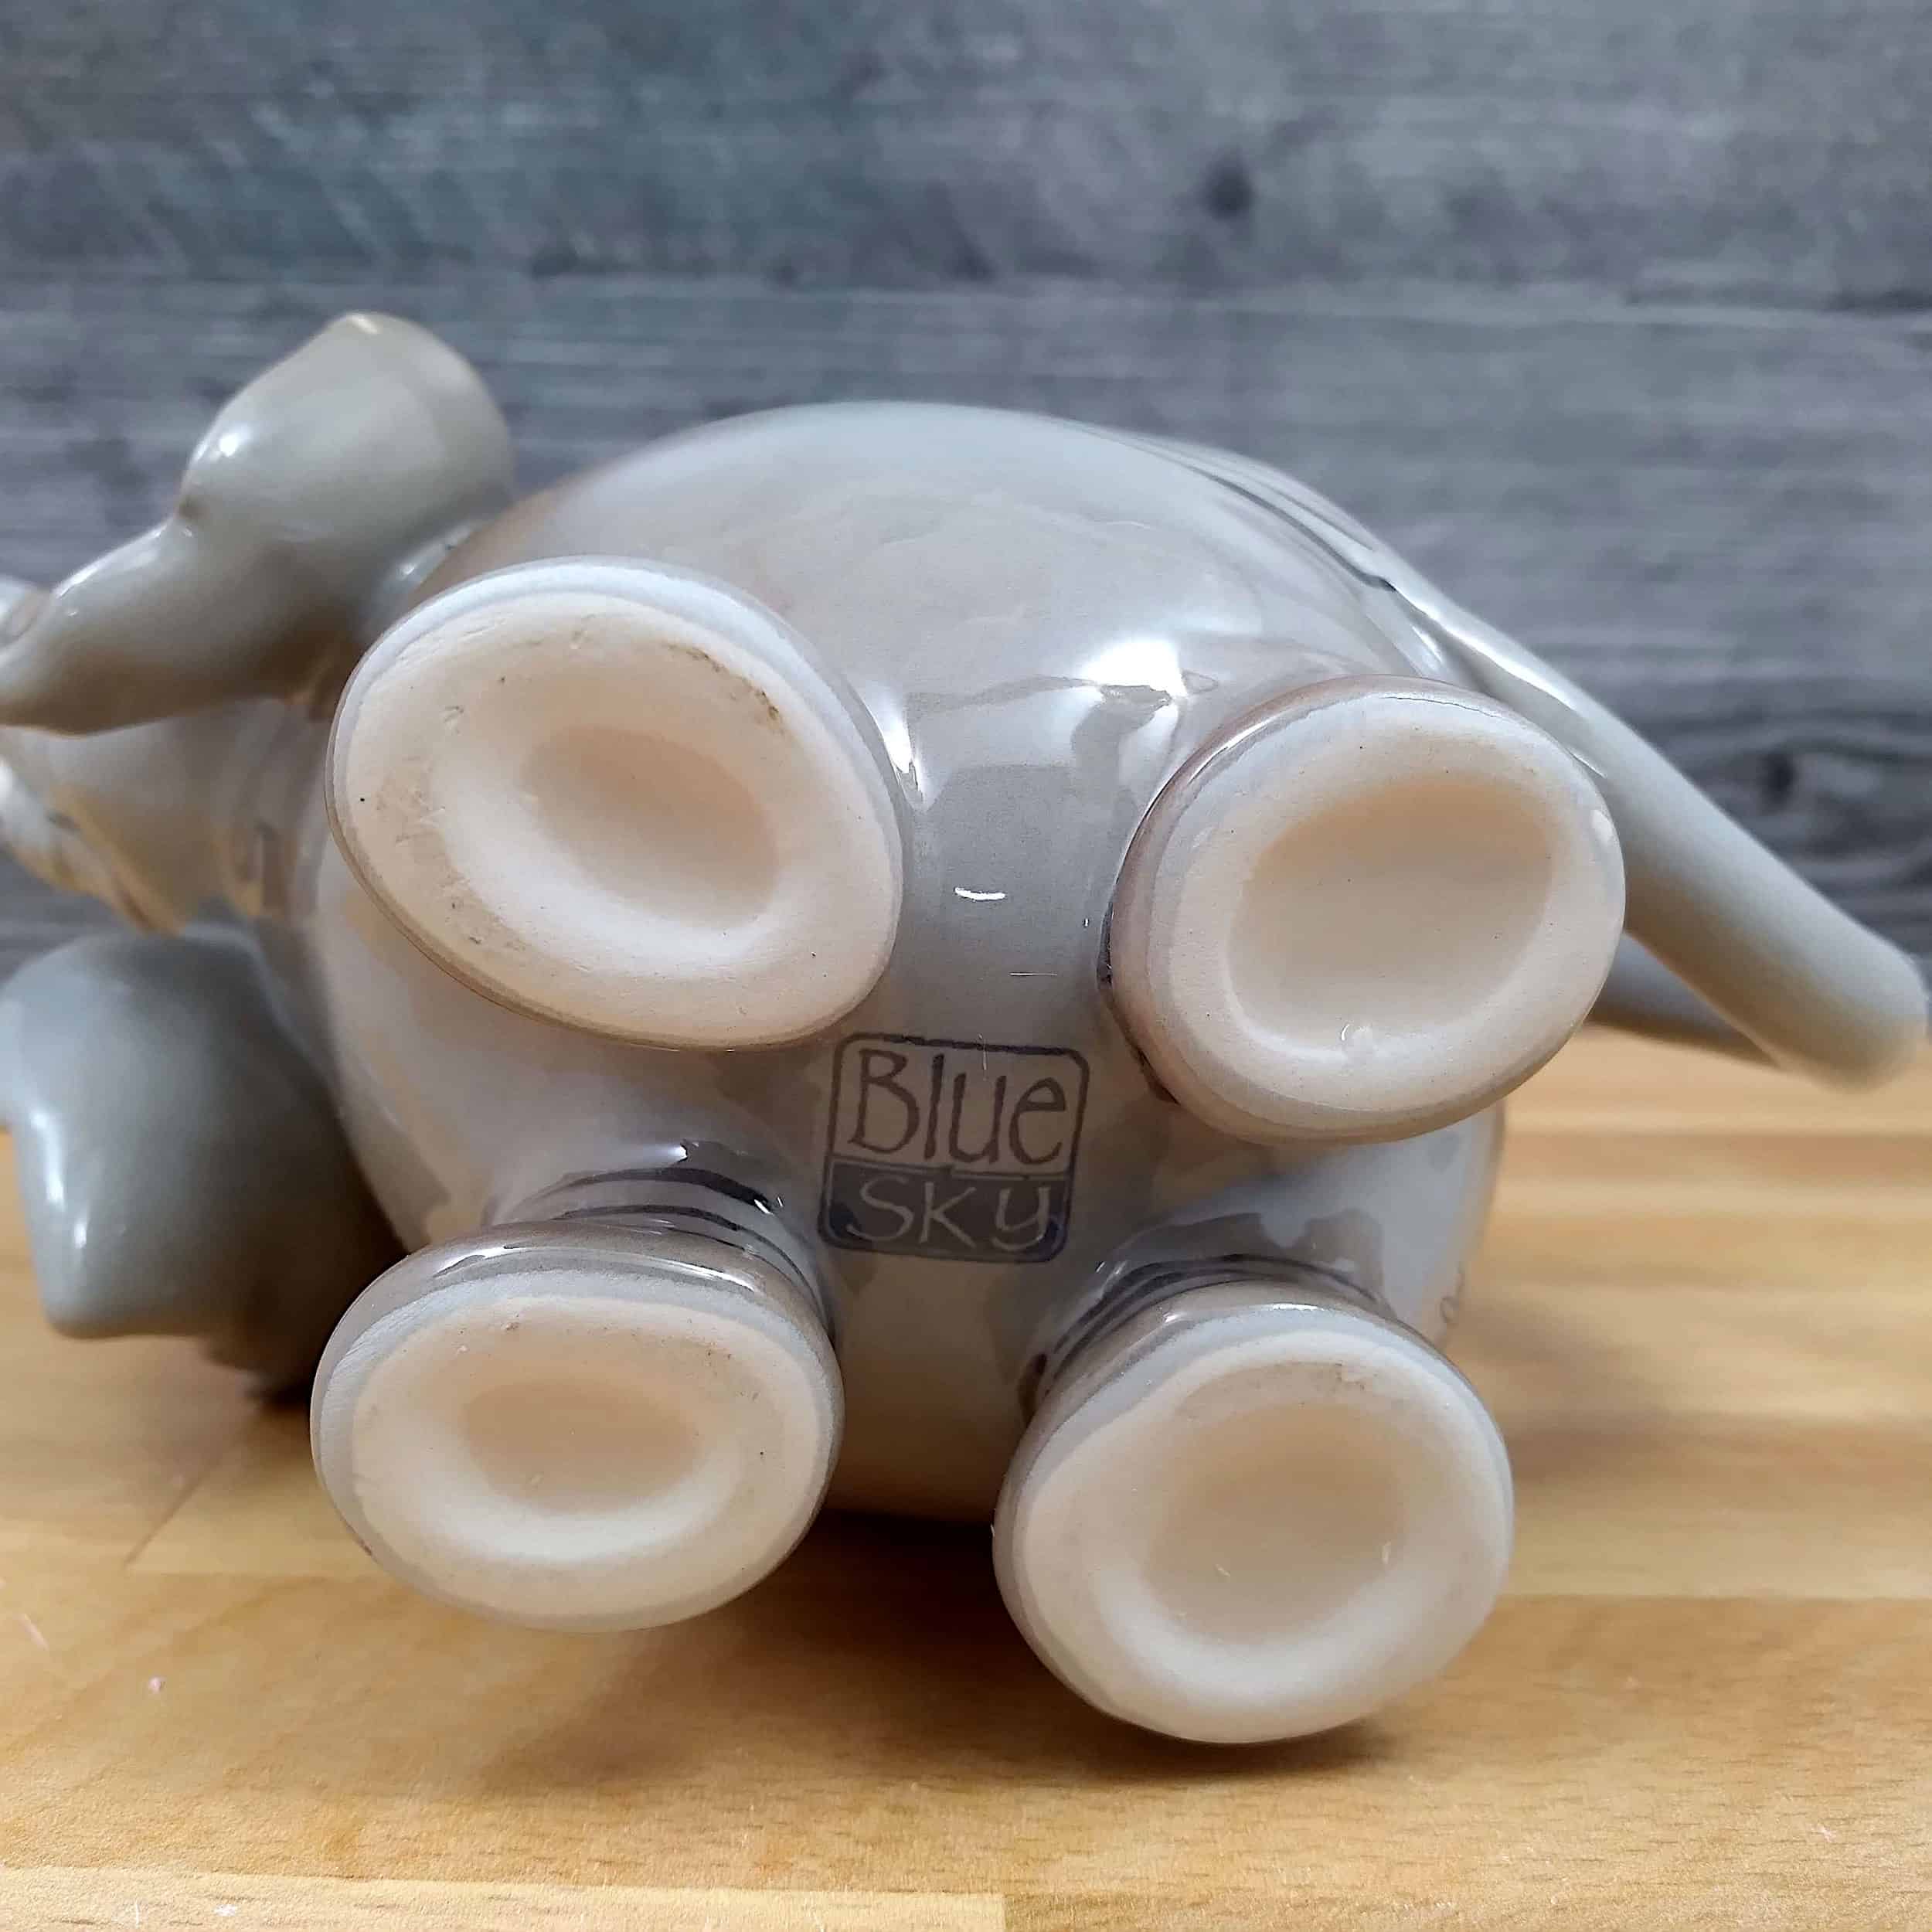 This Elephant Sugar Bowl and Creamer Set Decorative by Blue Sky is made with love by Premier Homegoods! Shop more unique gift ideas today with Spots Initiatives, the best way to support creators.